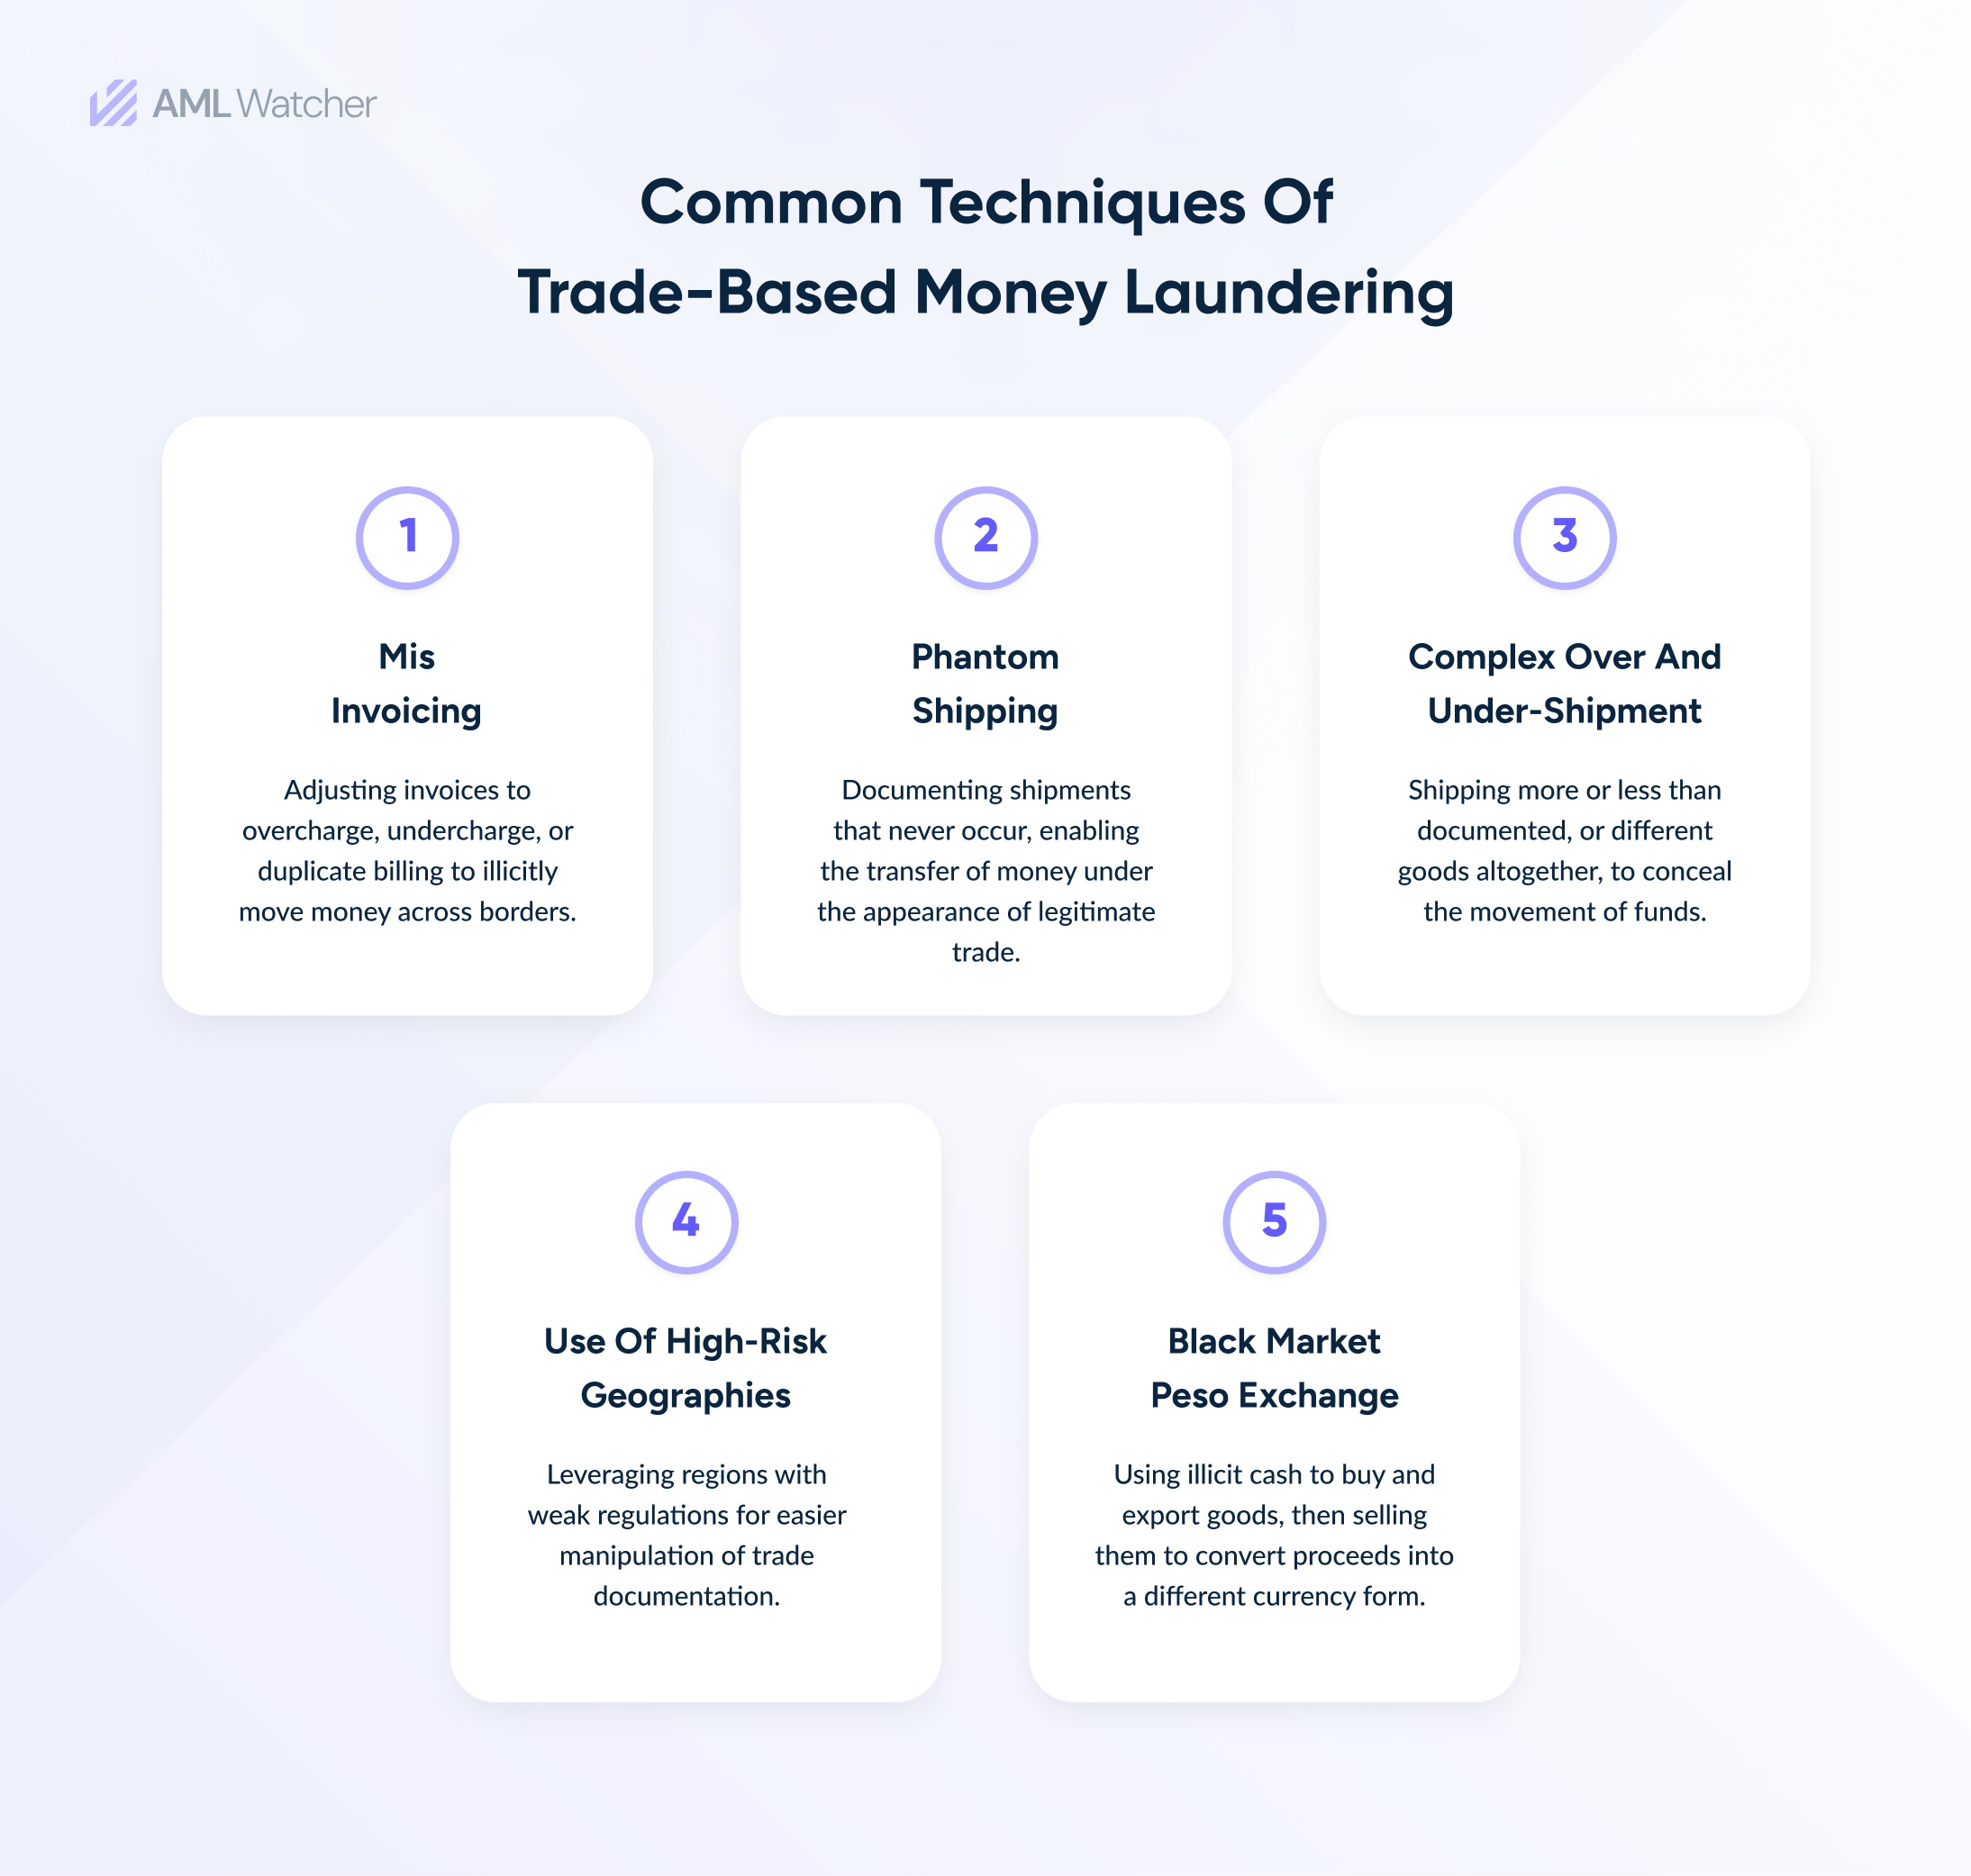 This image shows the common techniques of trade-based money laundering. 